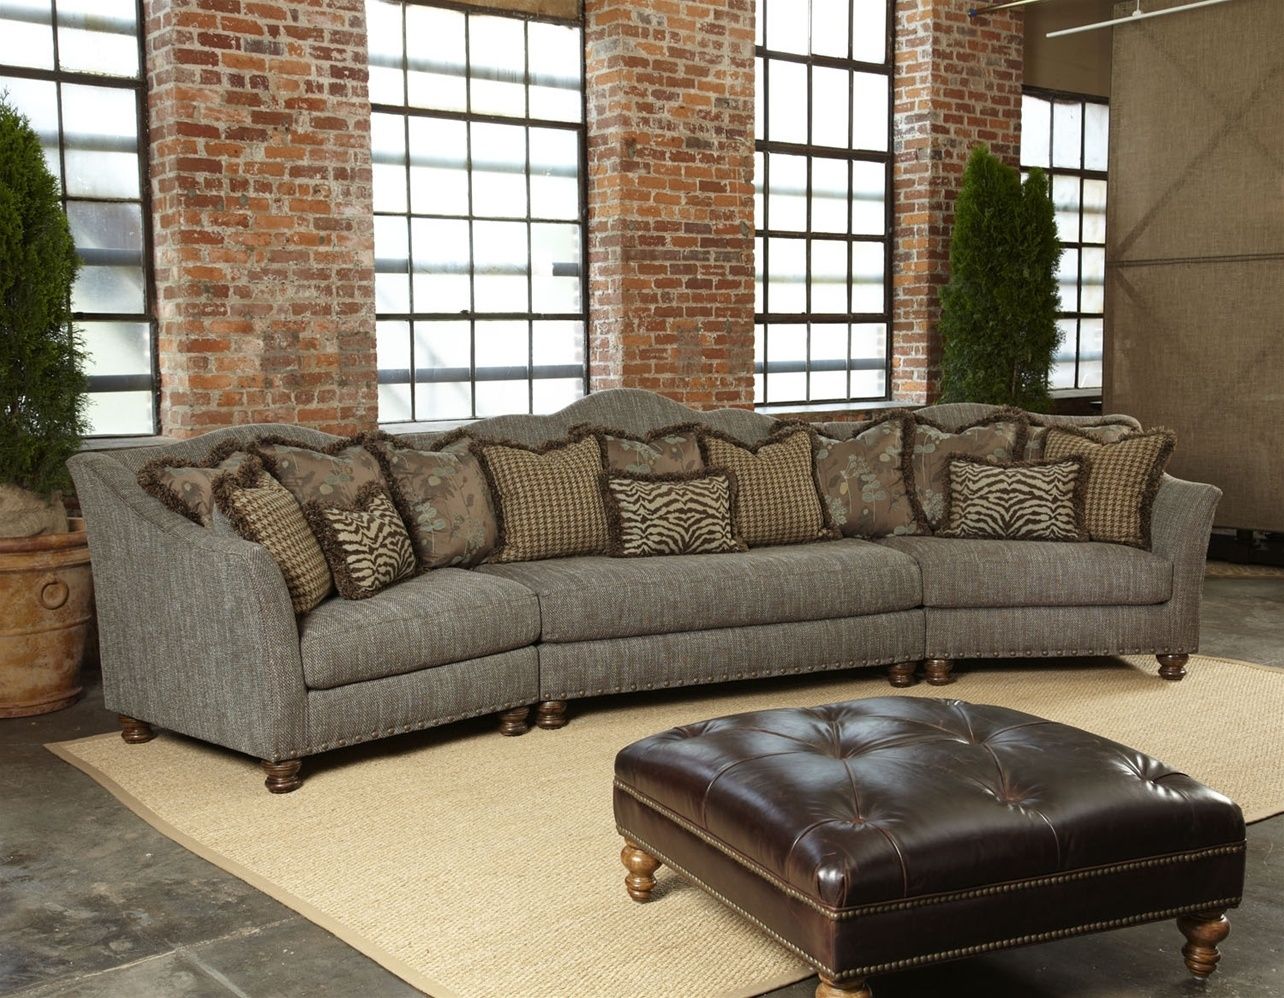 High End Sectional Sofas – Cleanupflorida In High End Leather Sectional Sofas (View 5 of 10)